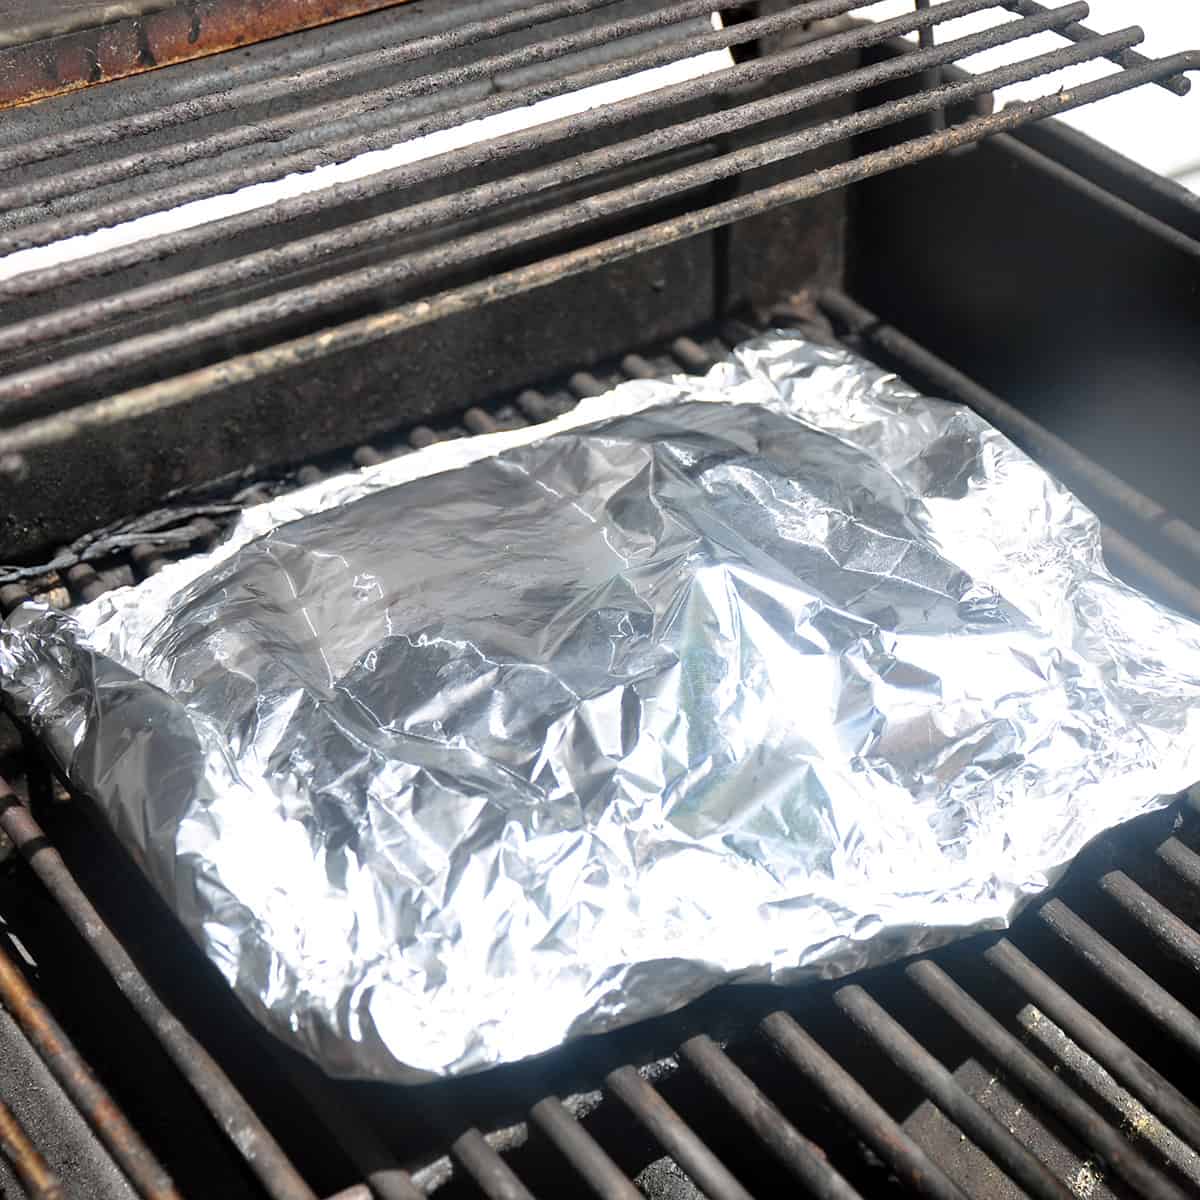 Foil packet on a Weber grill.